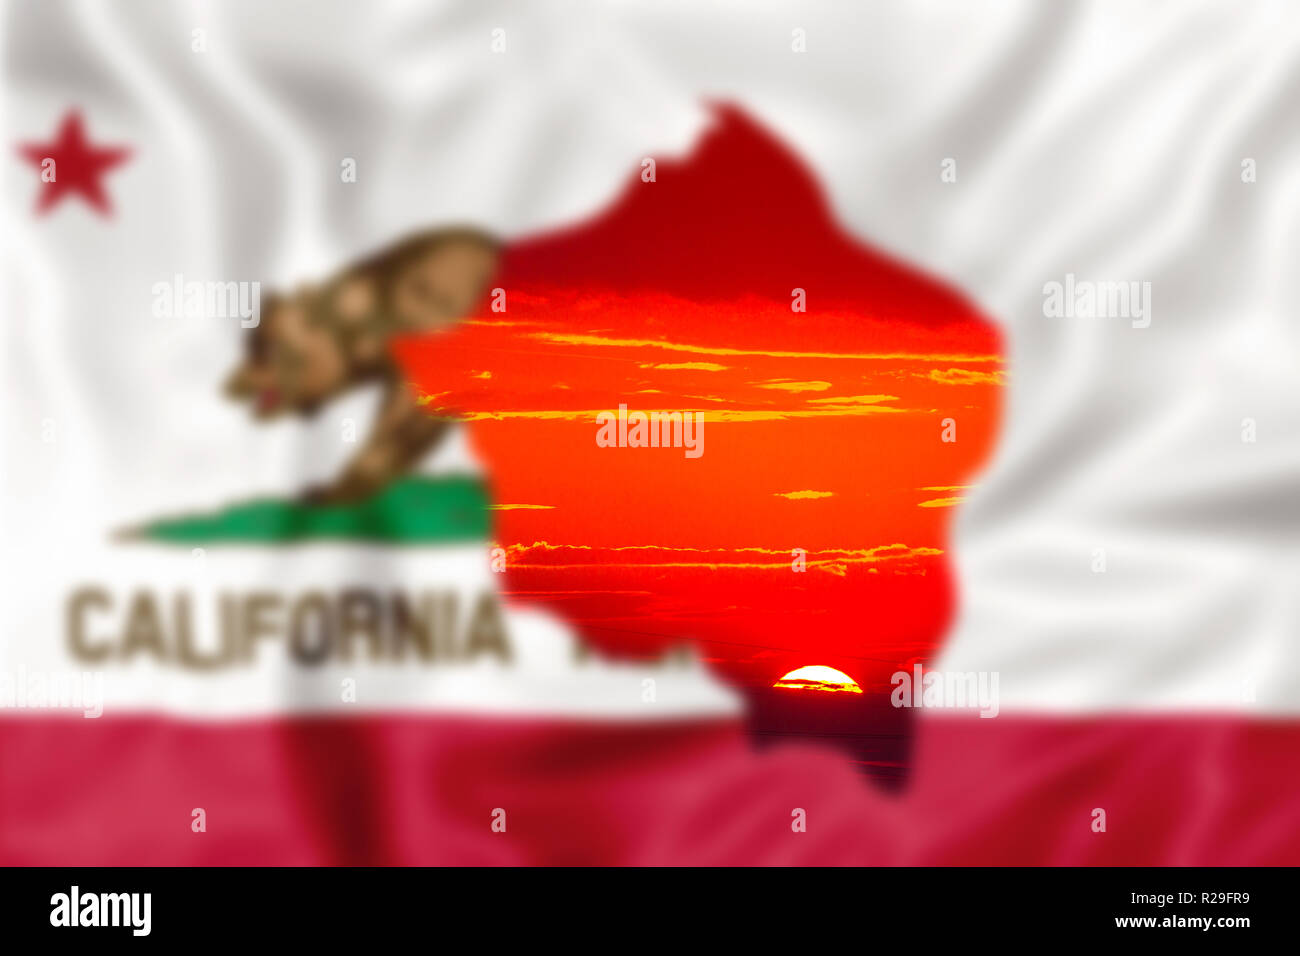 Blurred california Republic Flag with red sunset sky background. concept of fire affecting California in 2018. The most devastating and deadly ever seen in the United States of America. Stock Photo